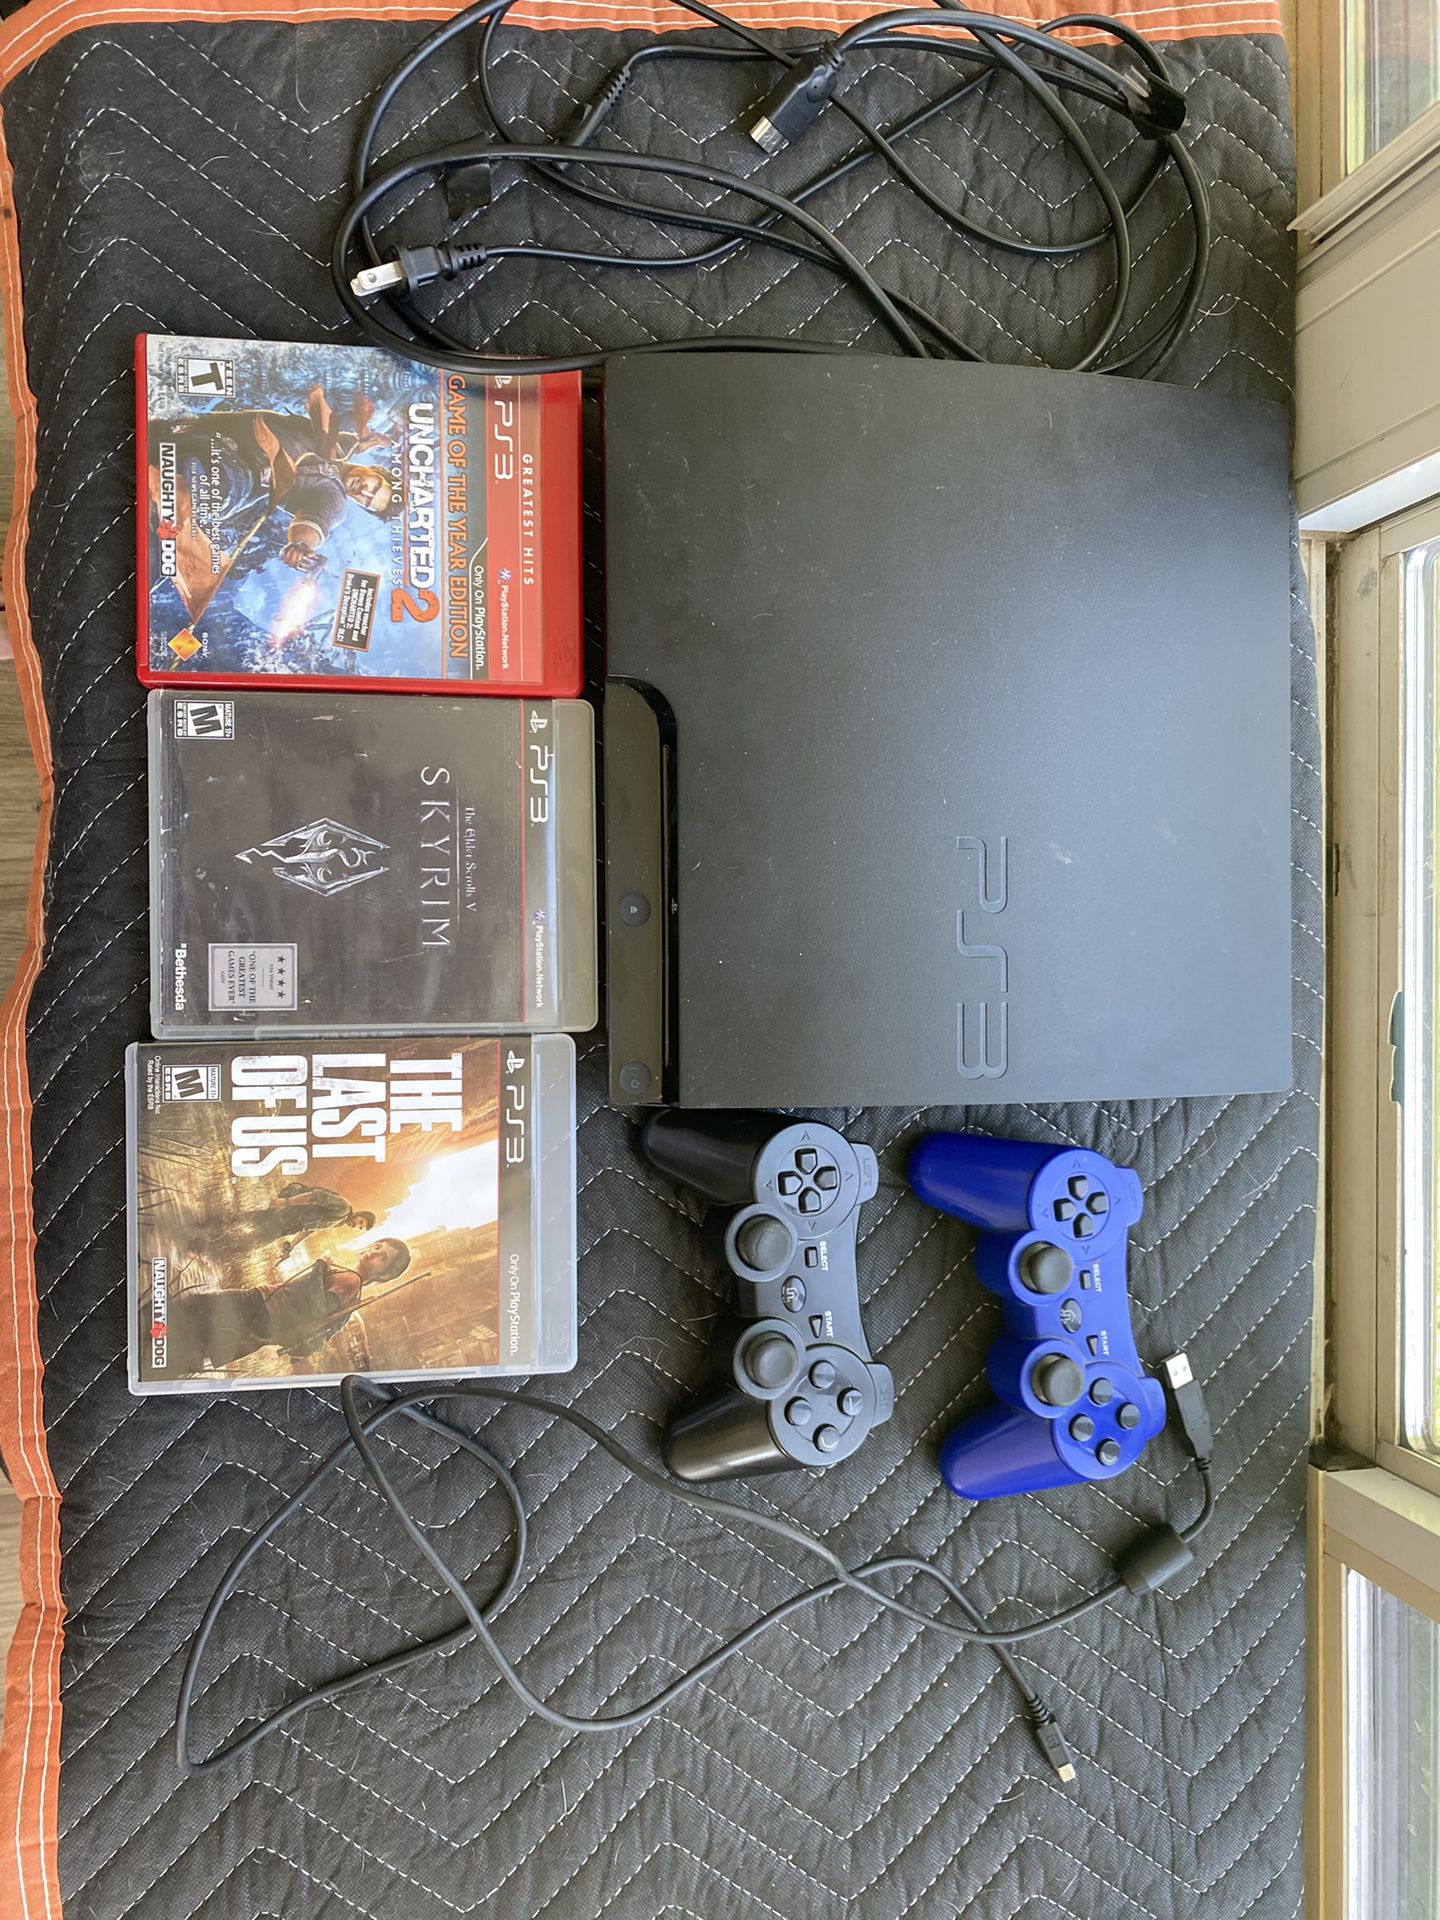 PS3 Slim 160gb And Games 